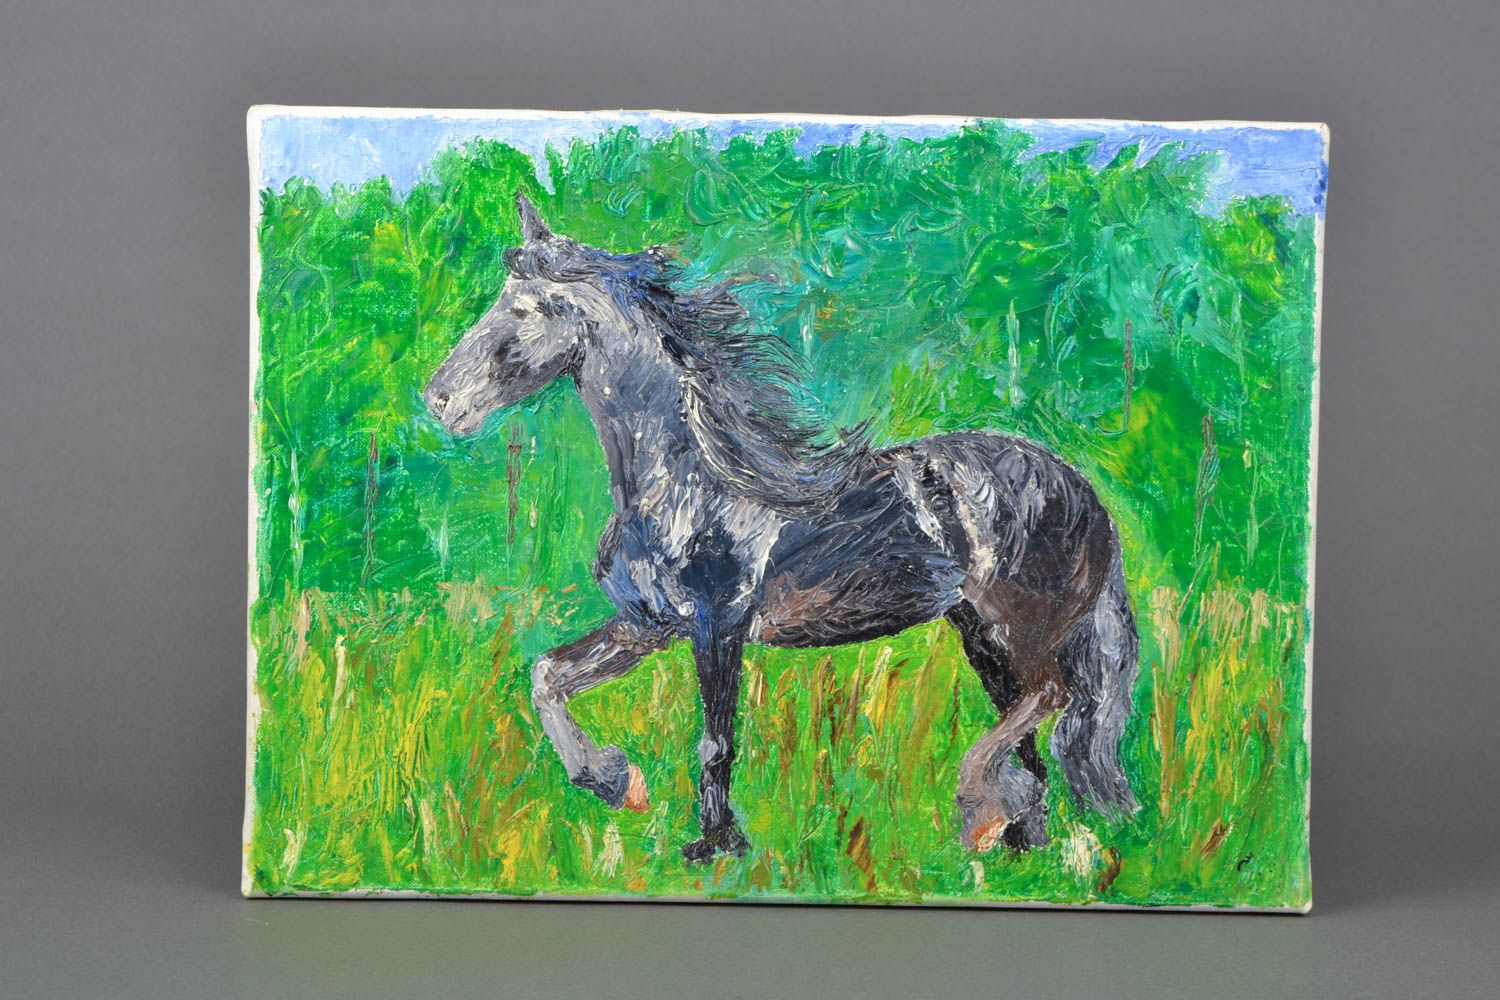 Oil picture of horse photo 1